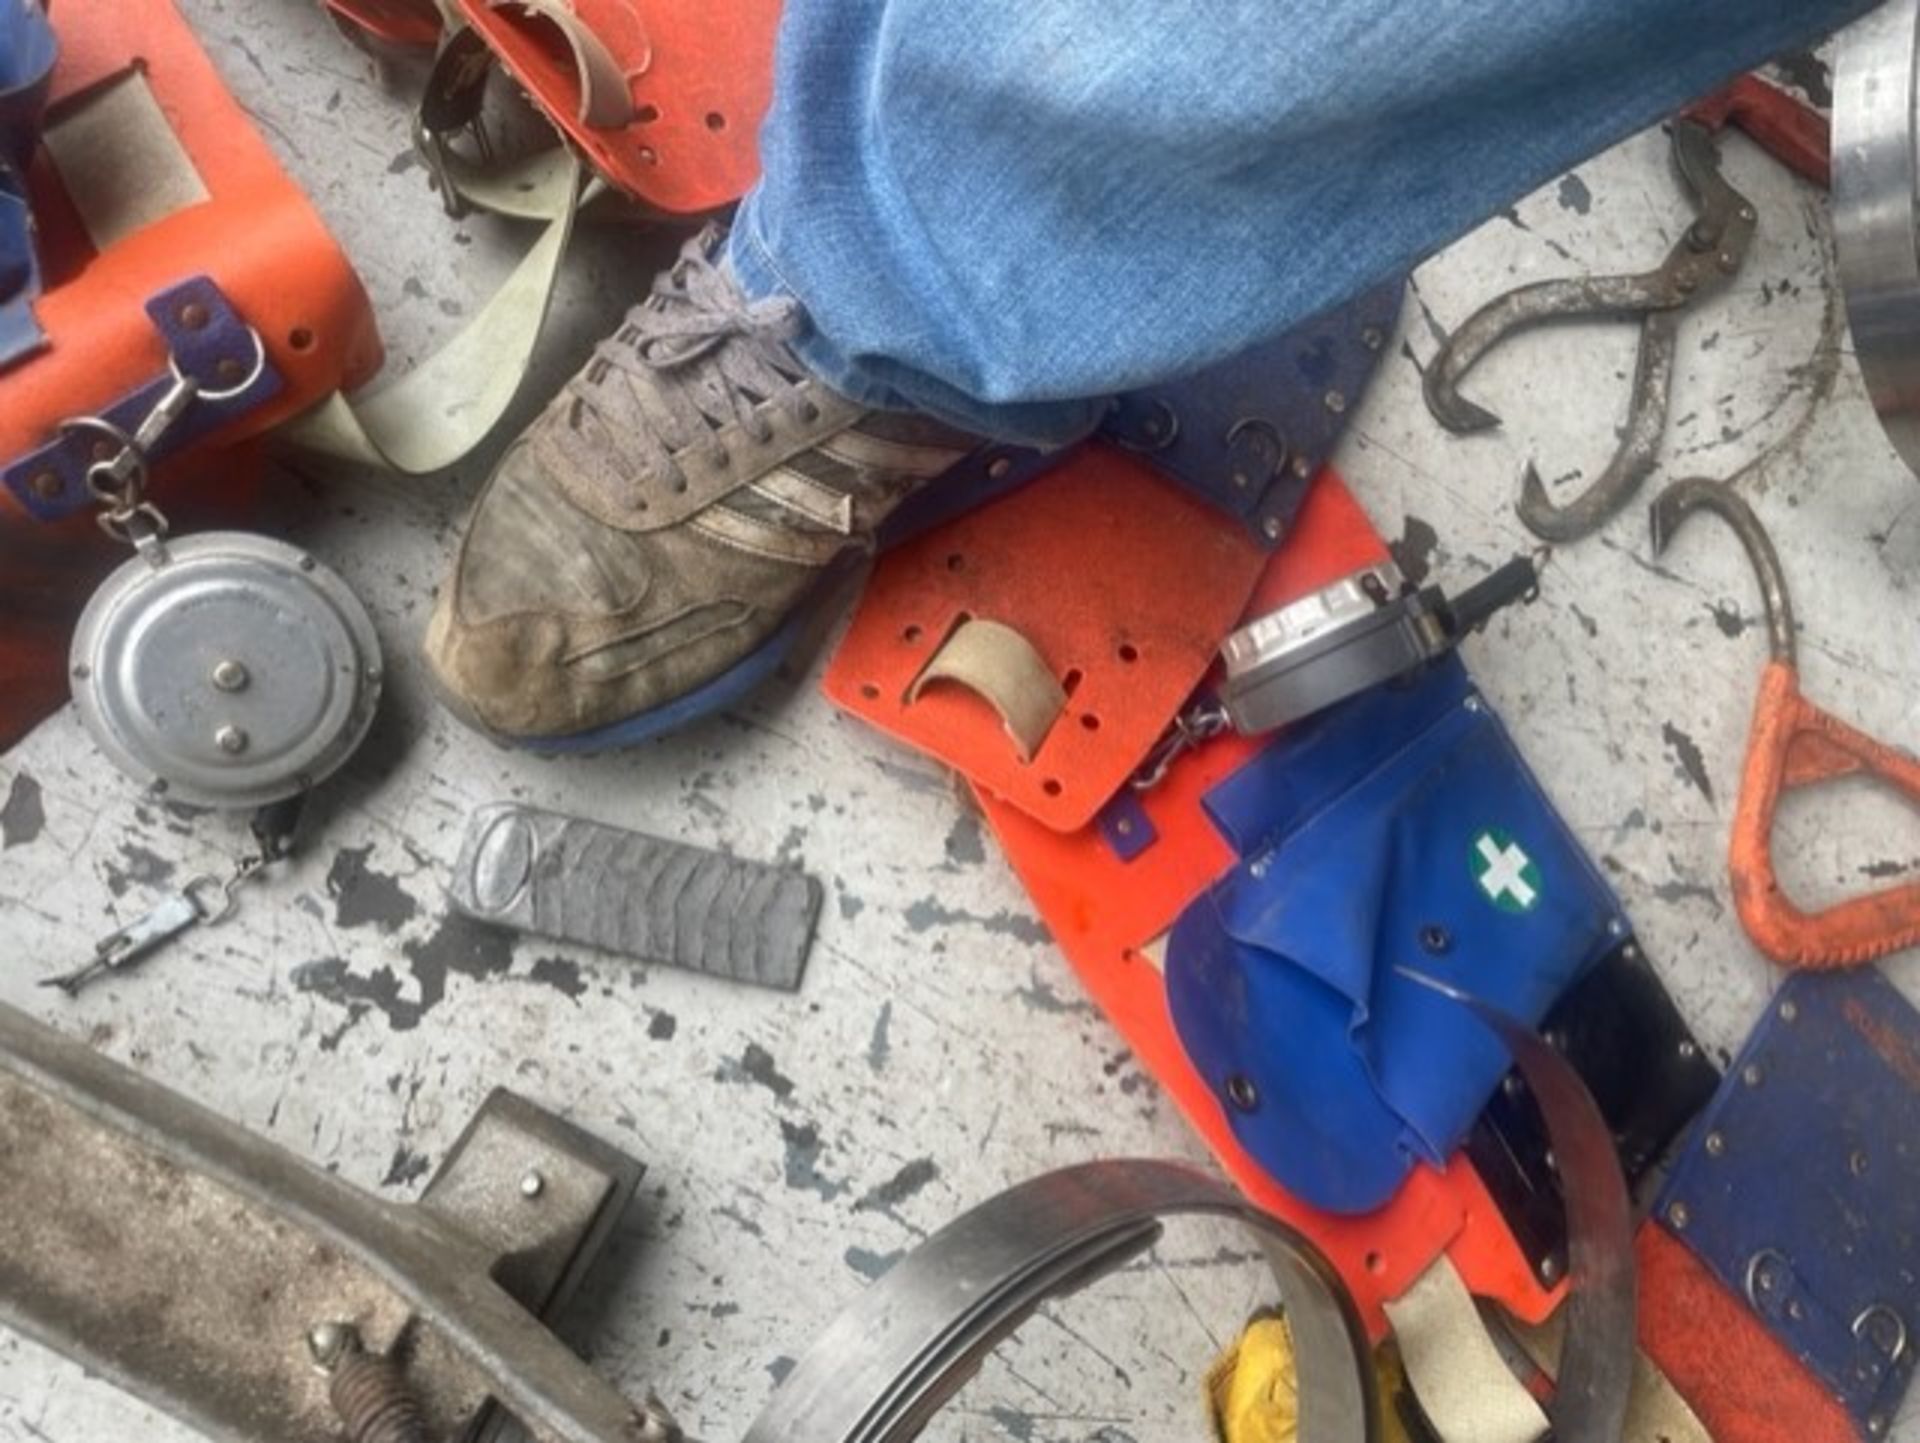 Tree surgeons tools forsips tapes wedges tool belts and climbing feet - Image 6 of 7